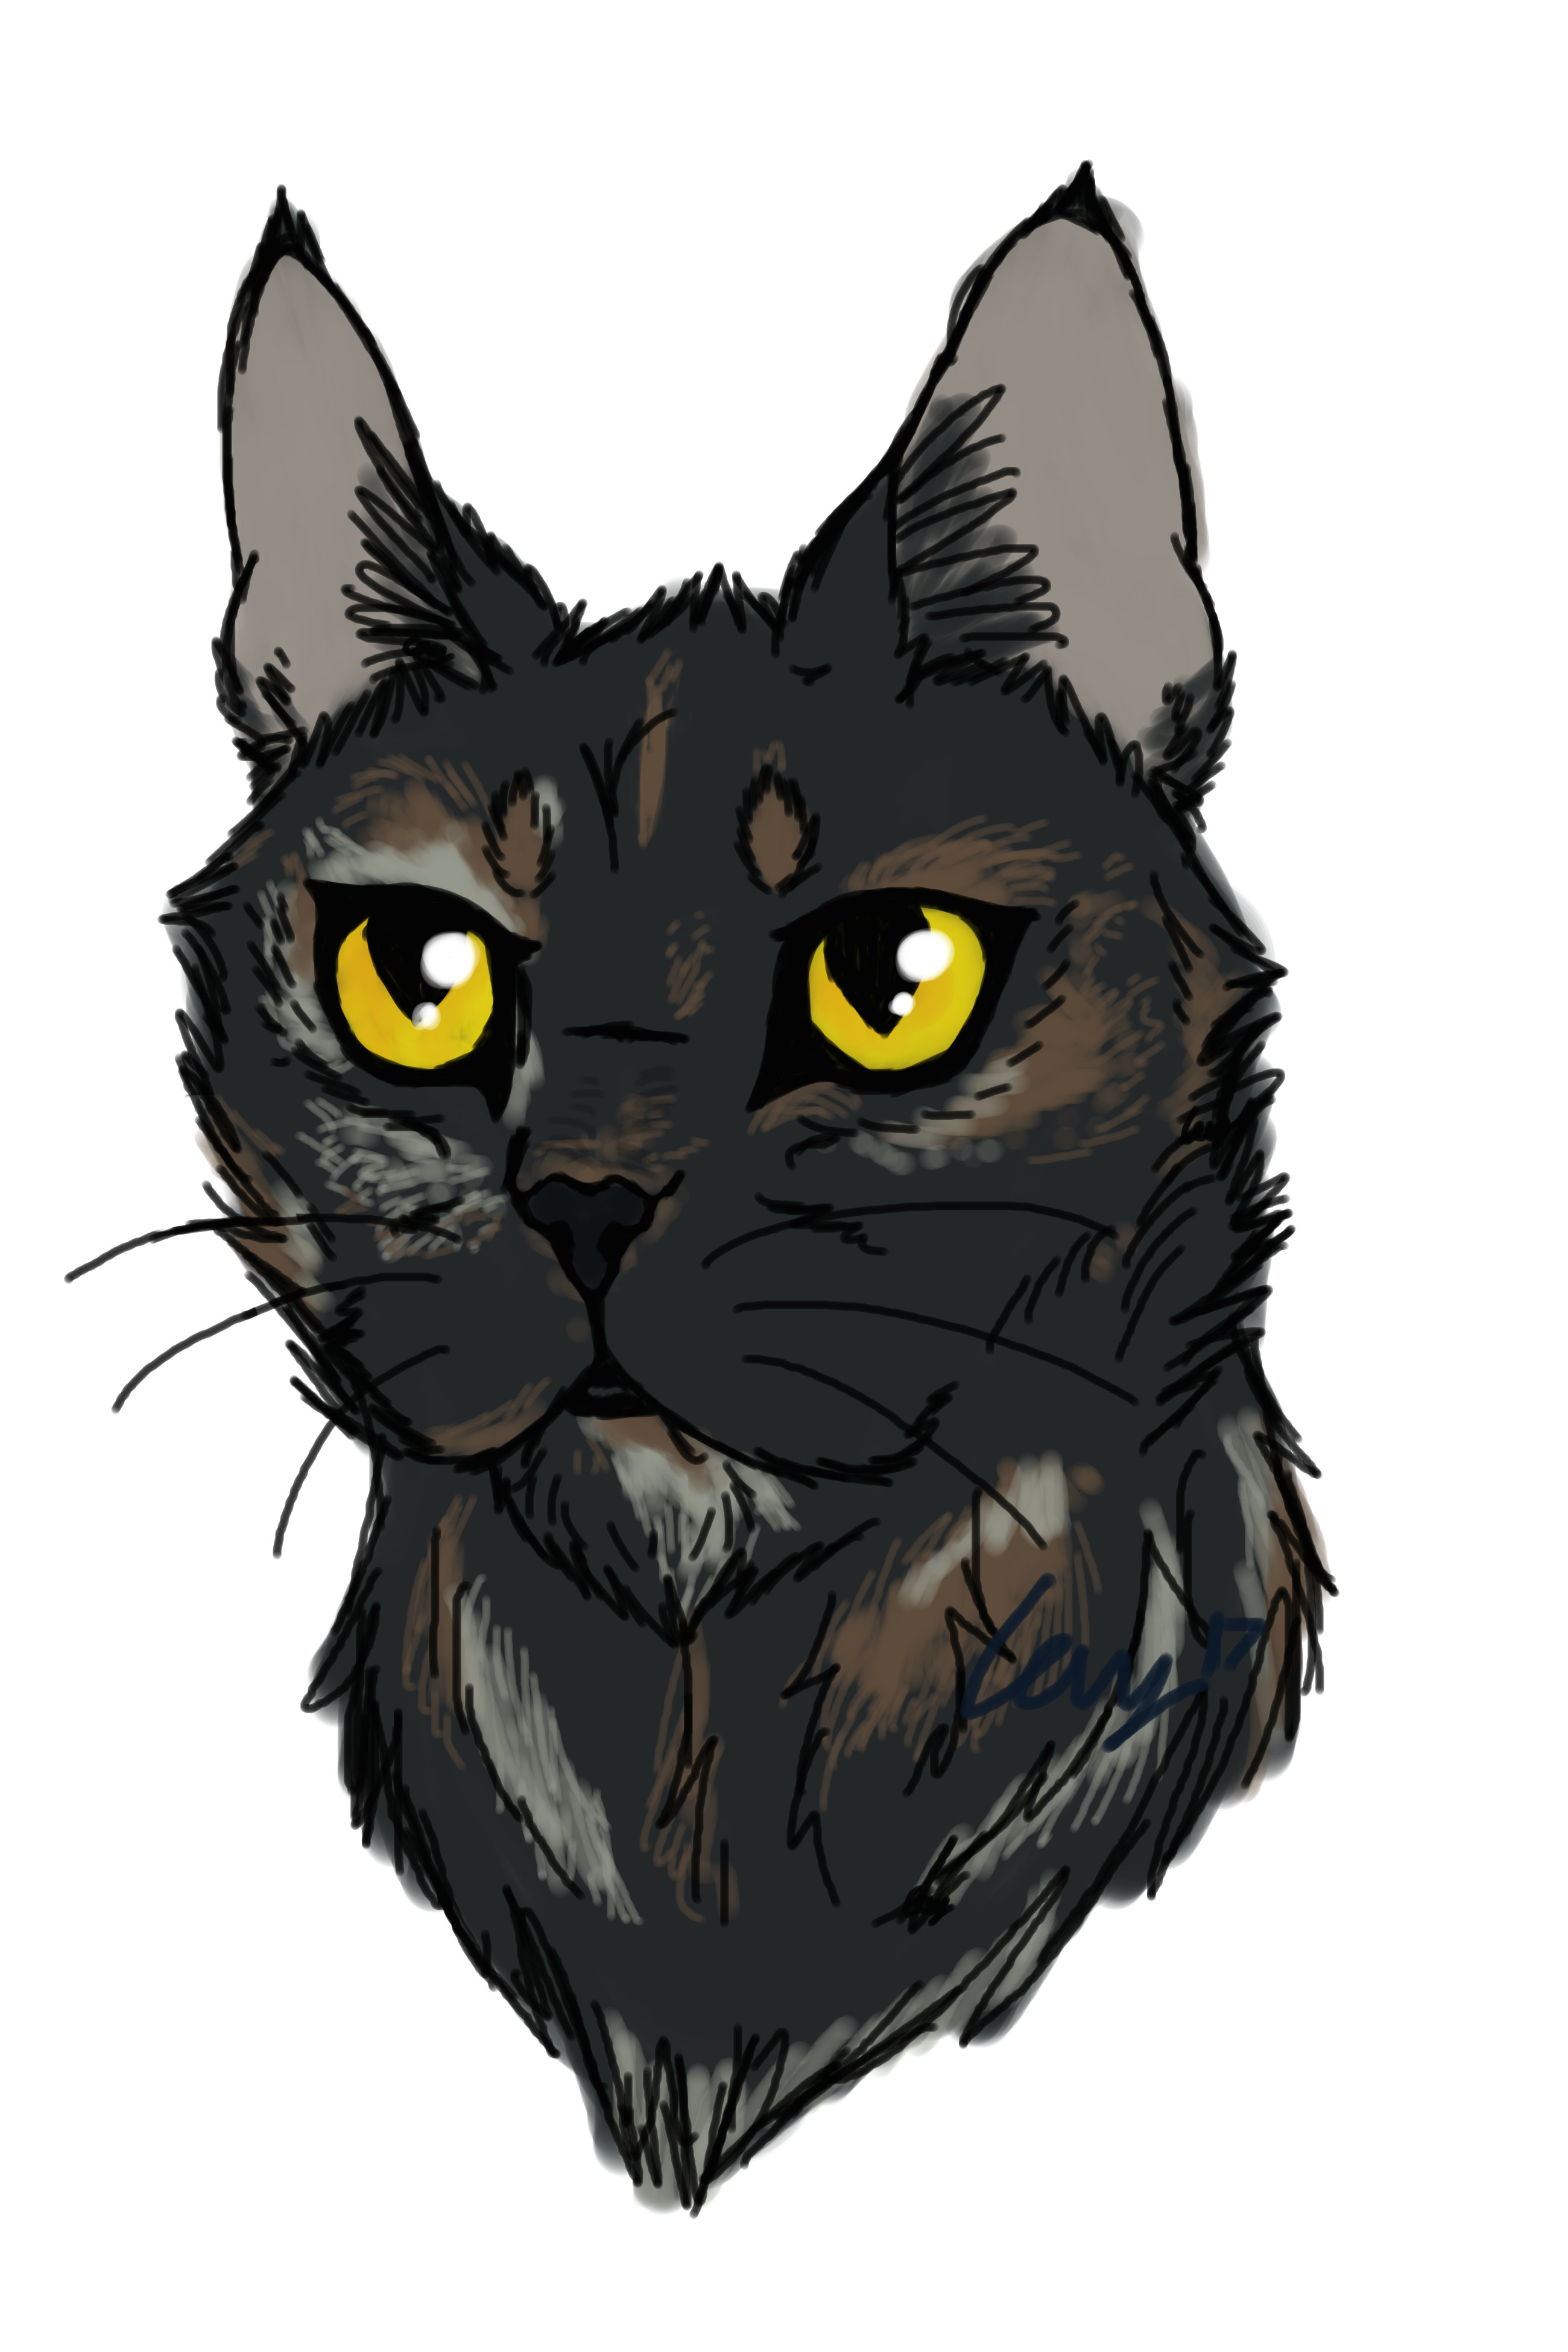 Drawing A Cat Quickly Does Imgur Like My Quick Drawing Of My Cat Album On Imgur